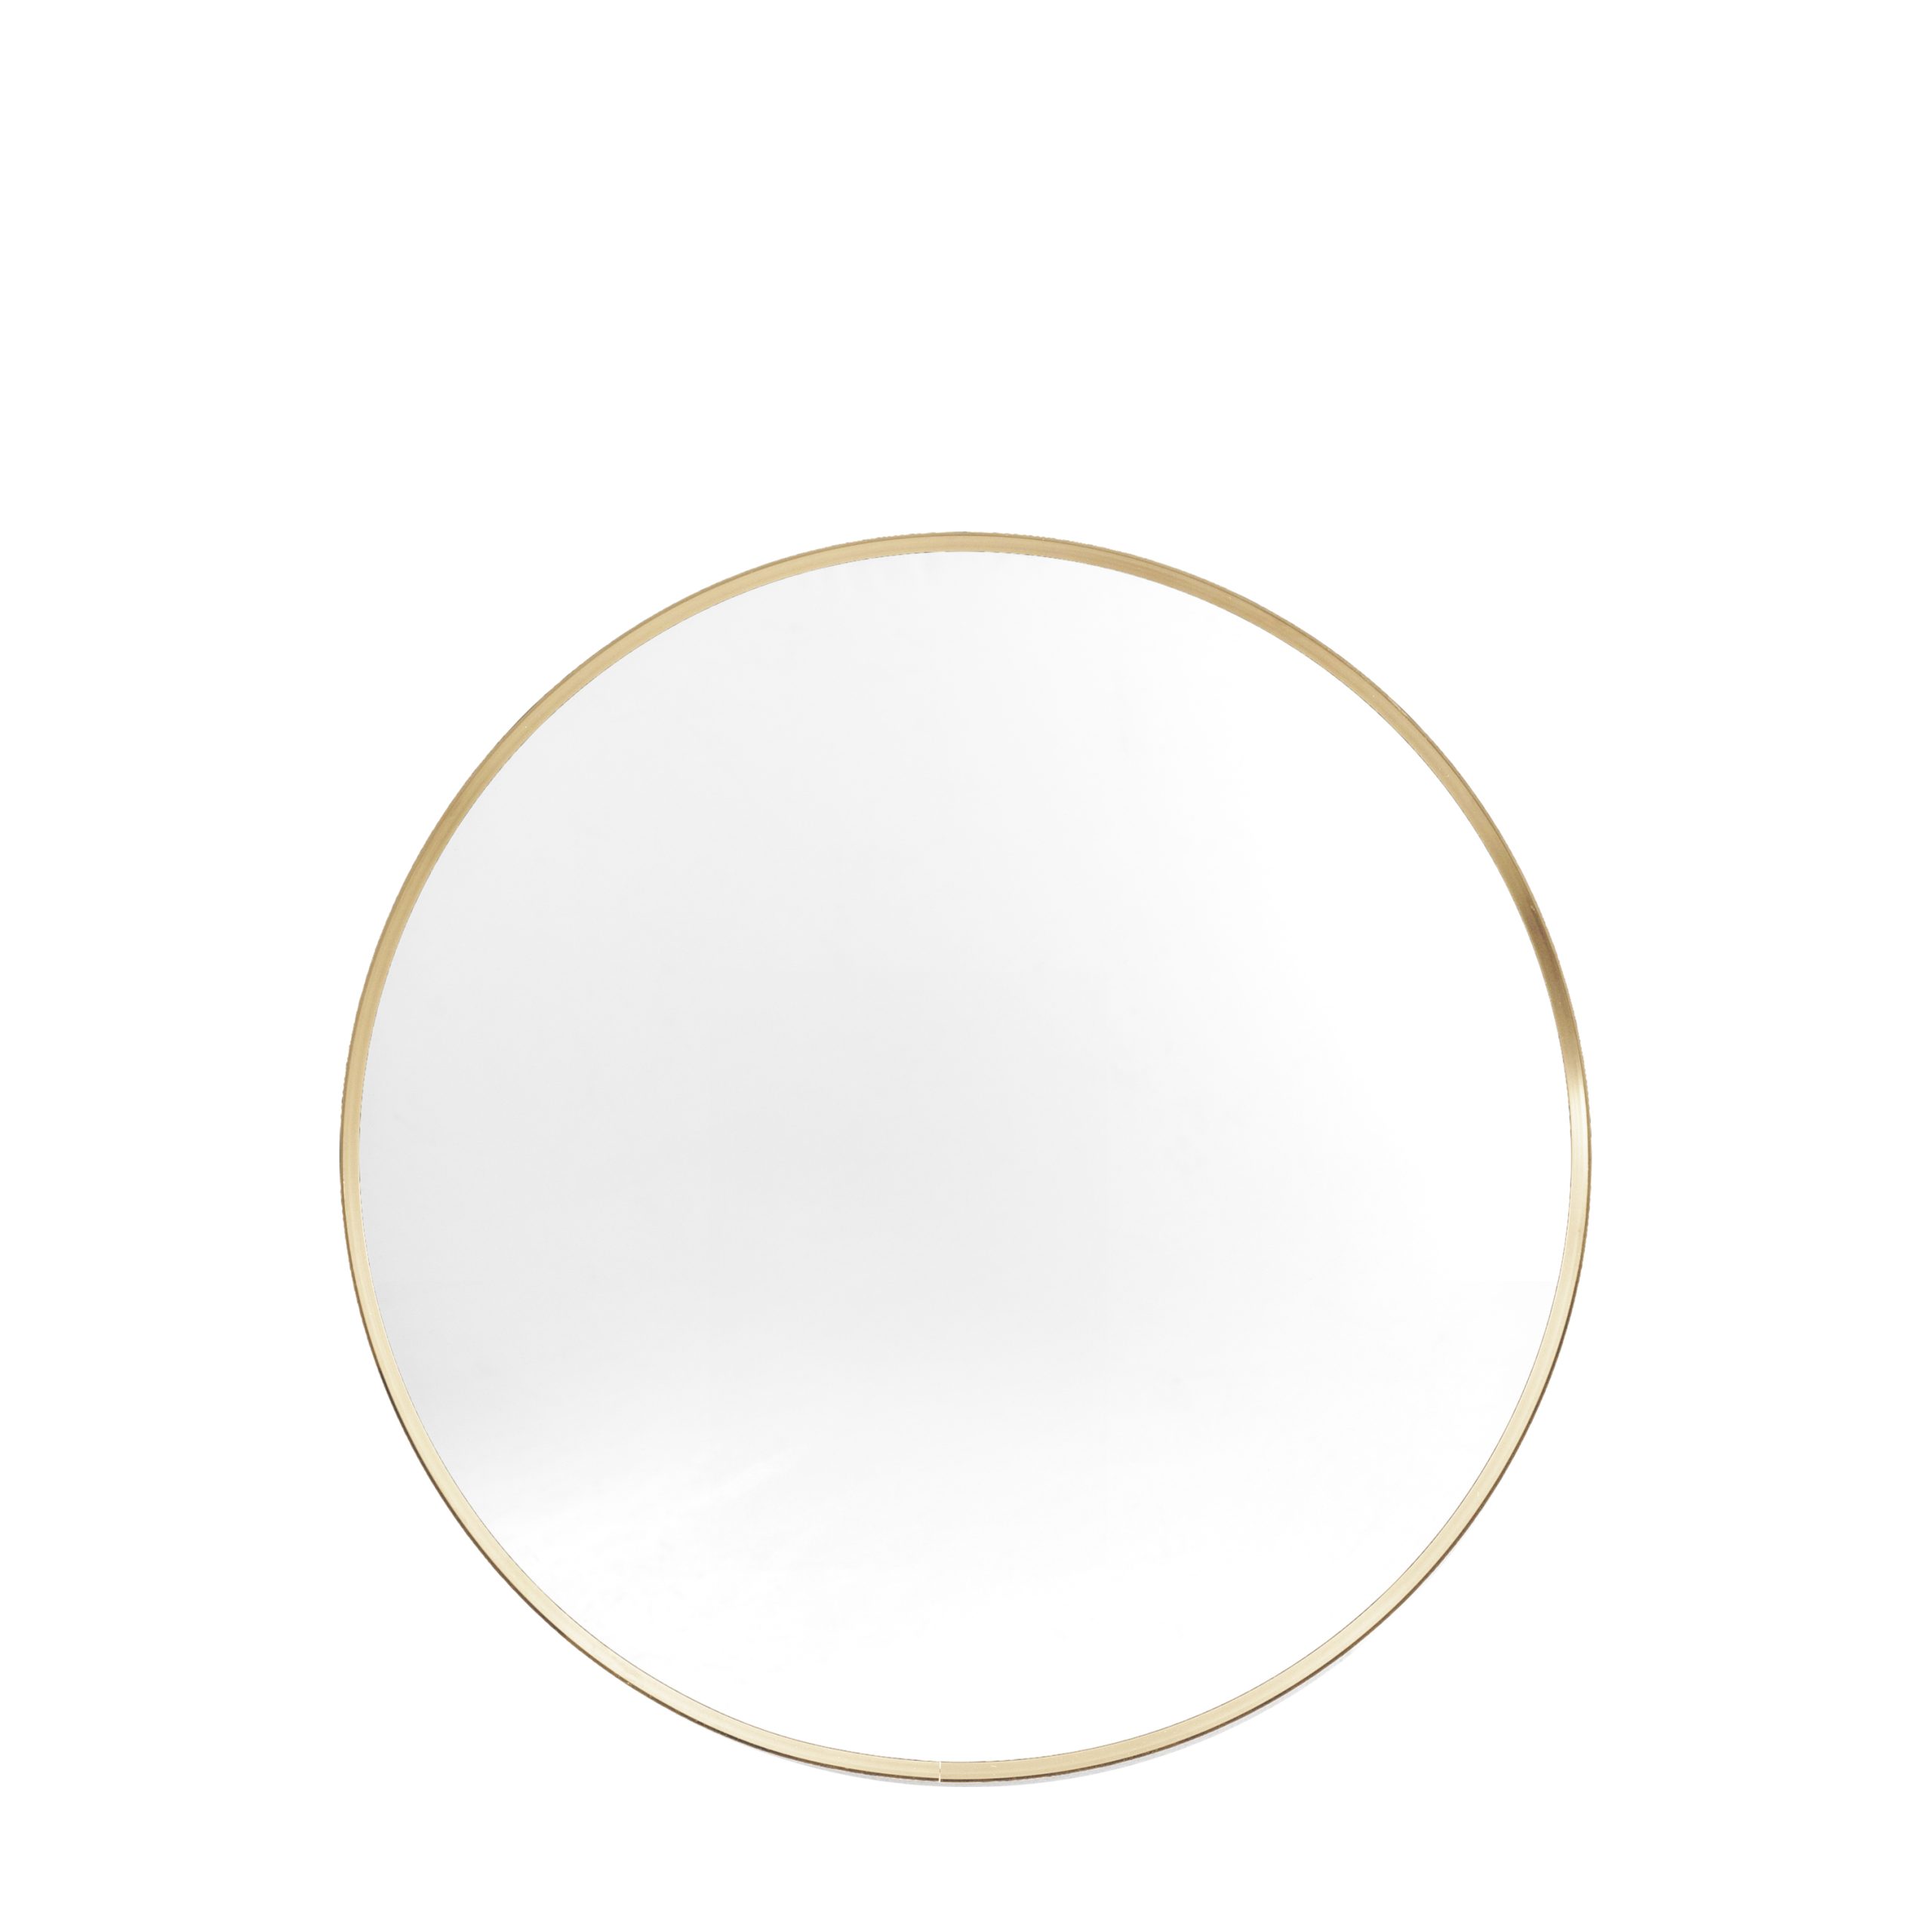 Gallery Direct Holworth Round Mirror Gold | Shackletons